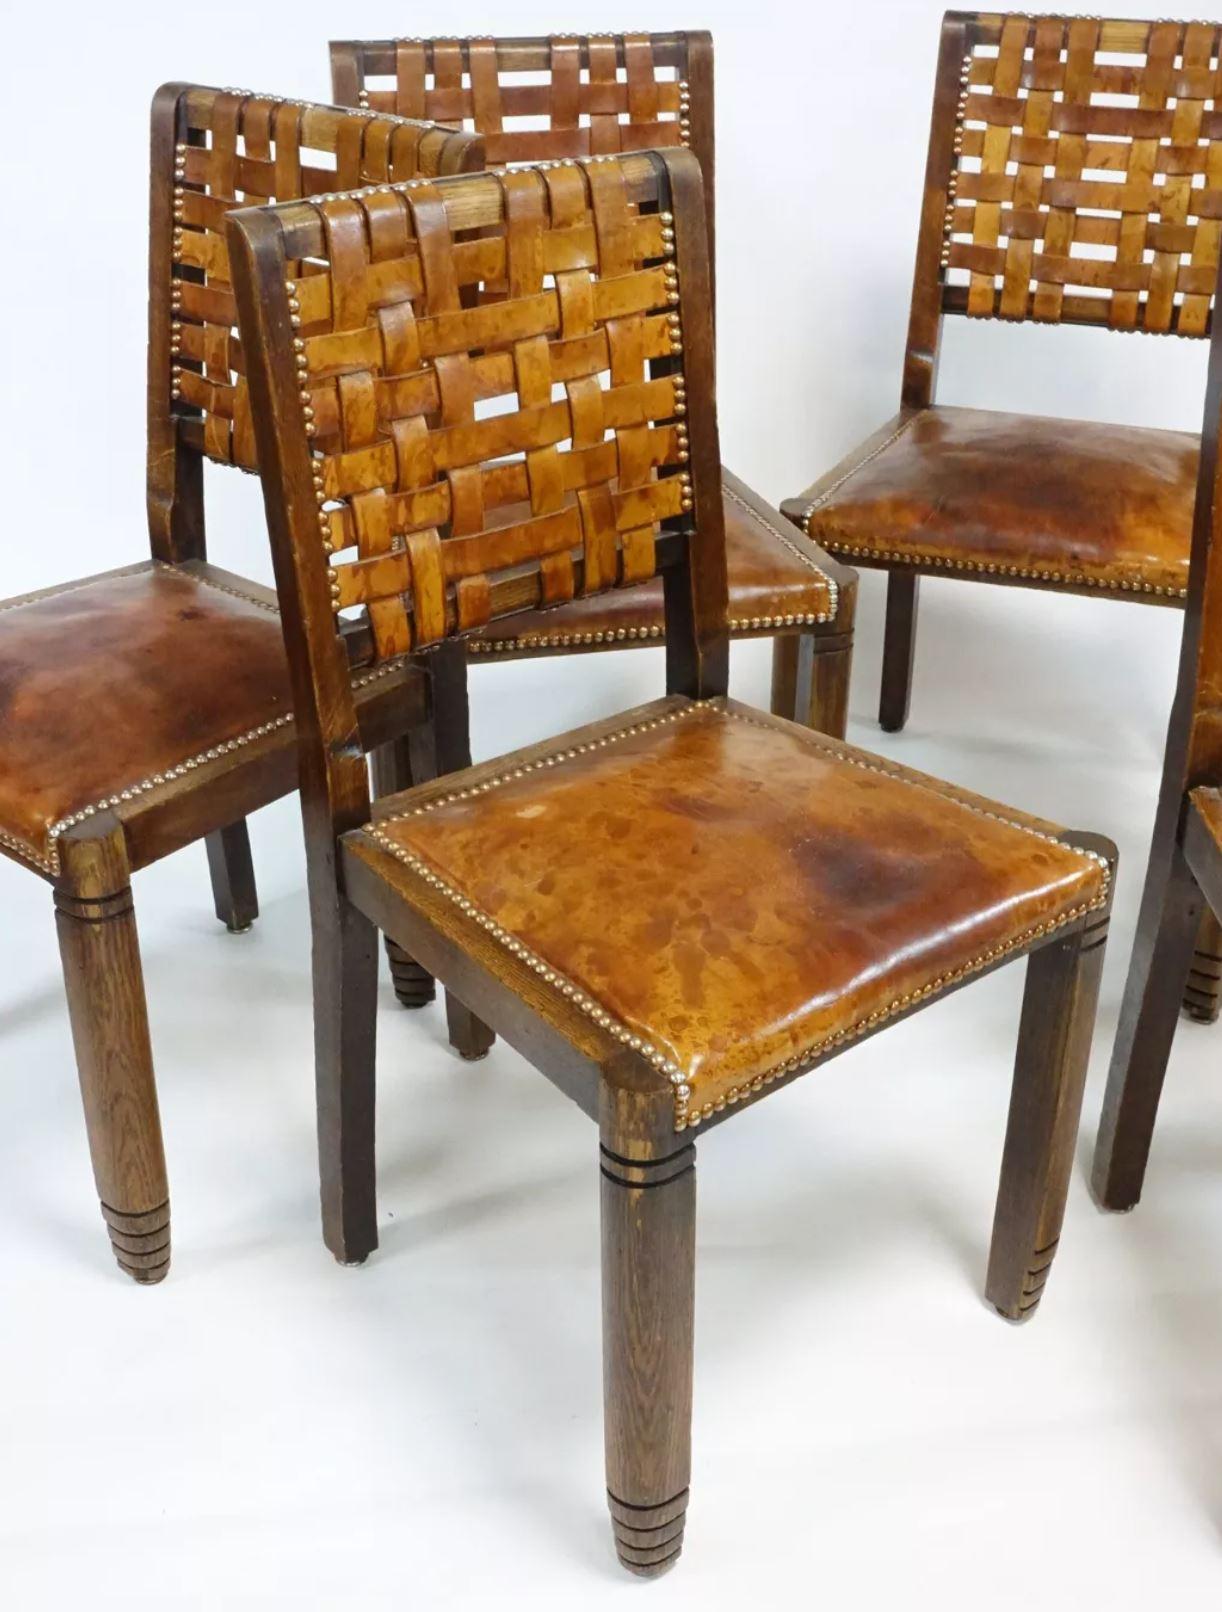 6 french brutalist chairs in good vintage conditions
.
Period : 1950s.
.
Leather, wood and studded. 
.
Superb patina. and veruy confortable ; suit with a lots of design periods.
.
Rare. 
.
Dimensions : 
Height : 88 cm. 
Width : 48 cm. 
Seat height :